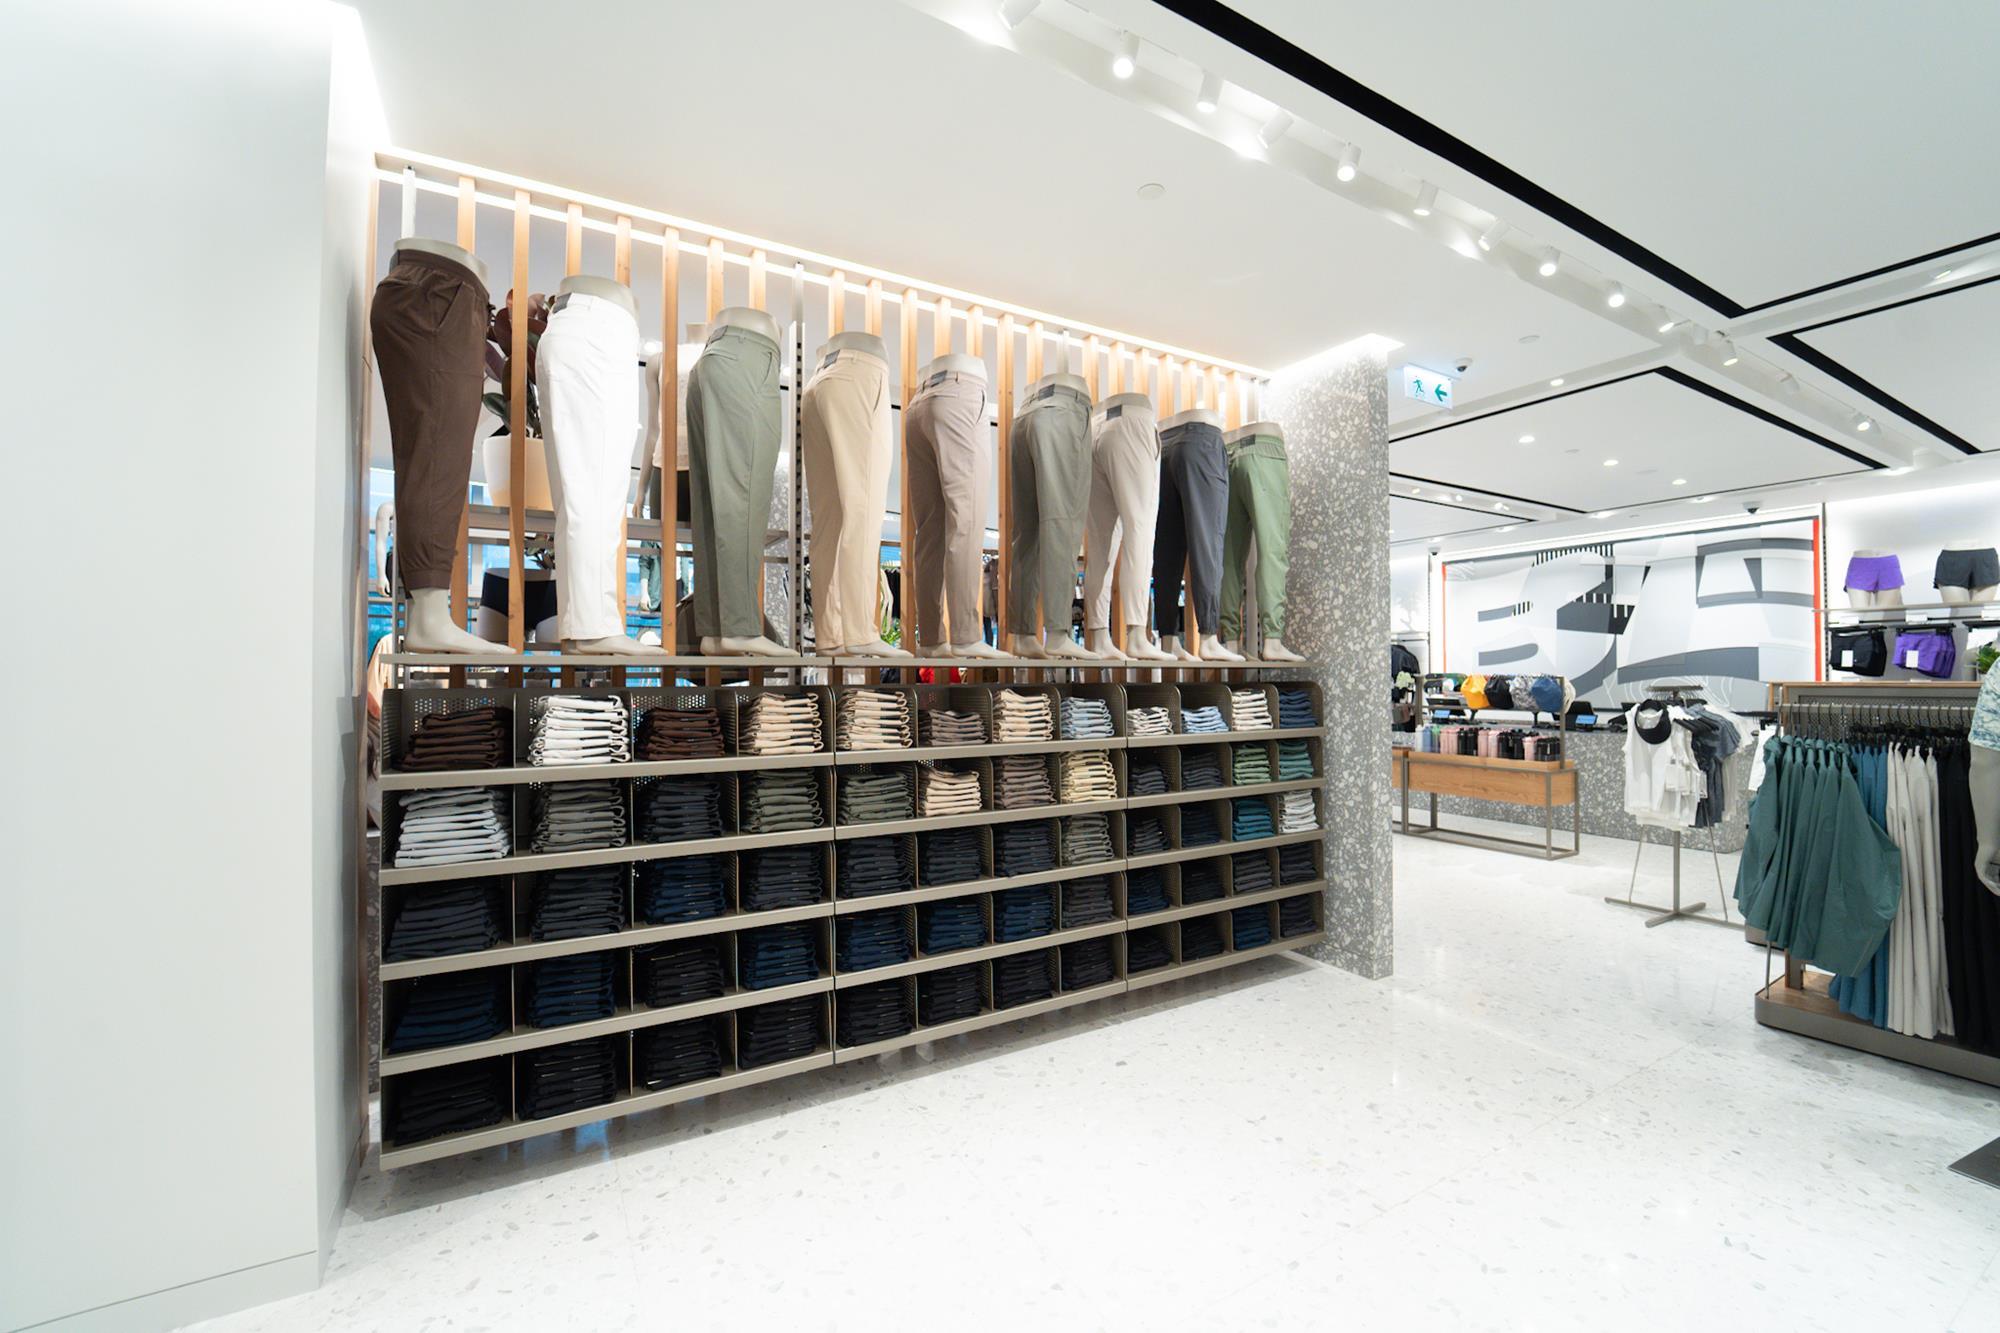 Lululemon opens newly renovated store in Hong Kong